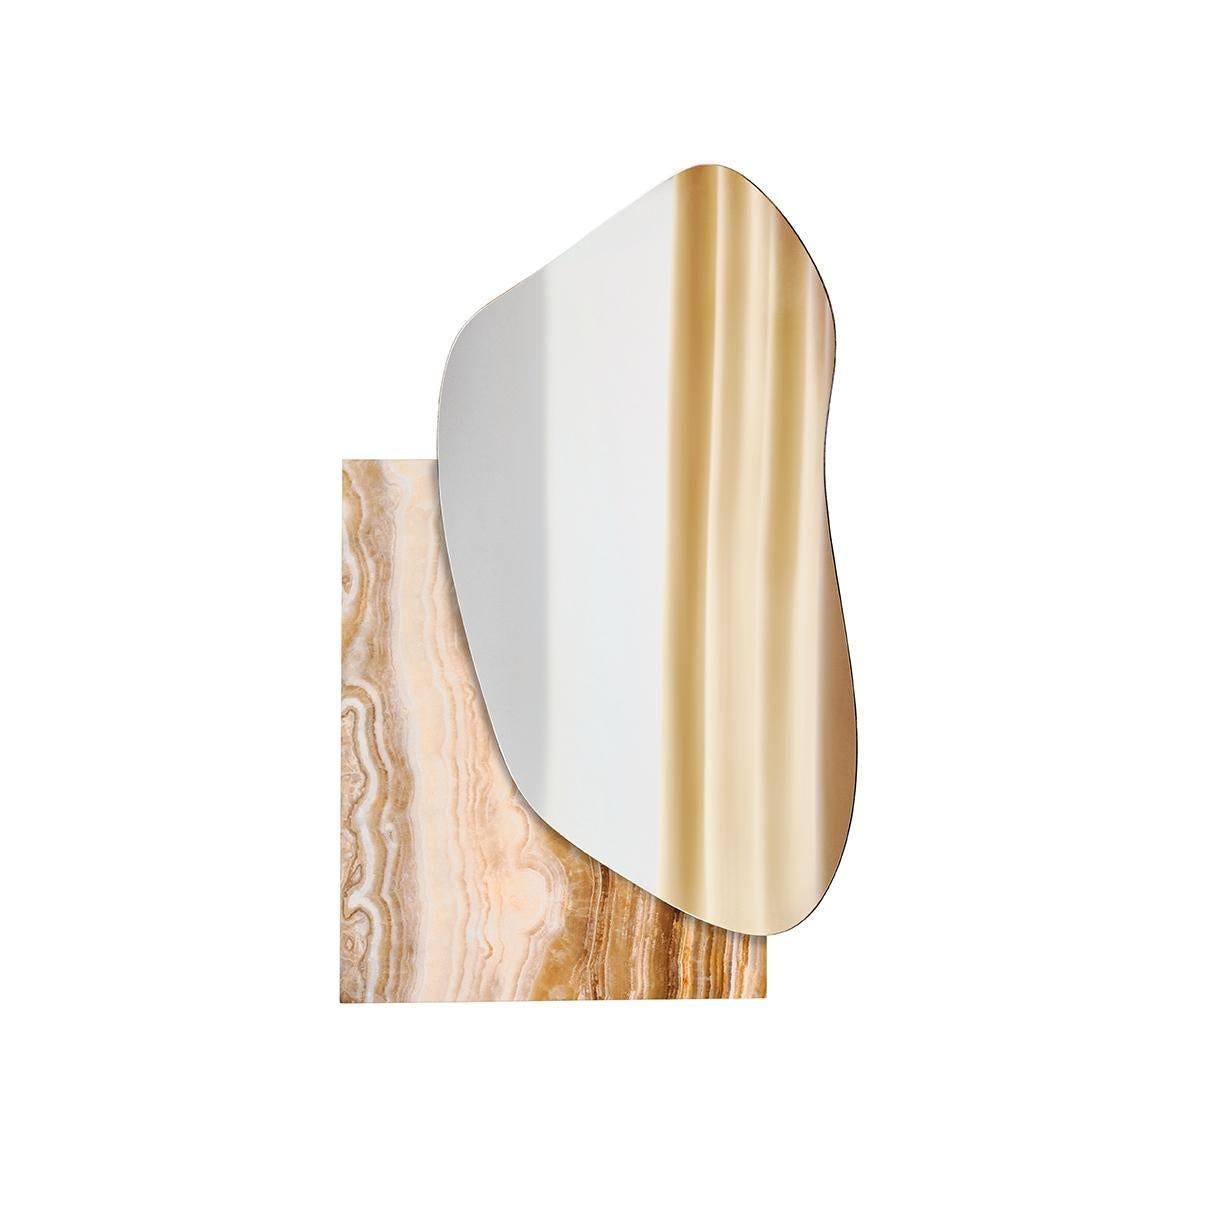 Organic Modern Contemporary Wall Mirror 'Lake 1' by Noom, White Marble Statuario For Sale